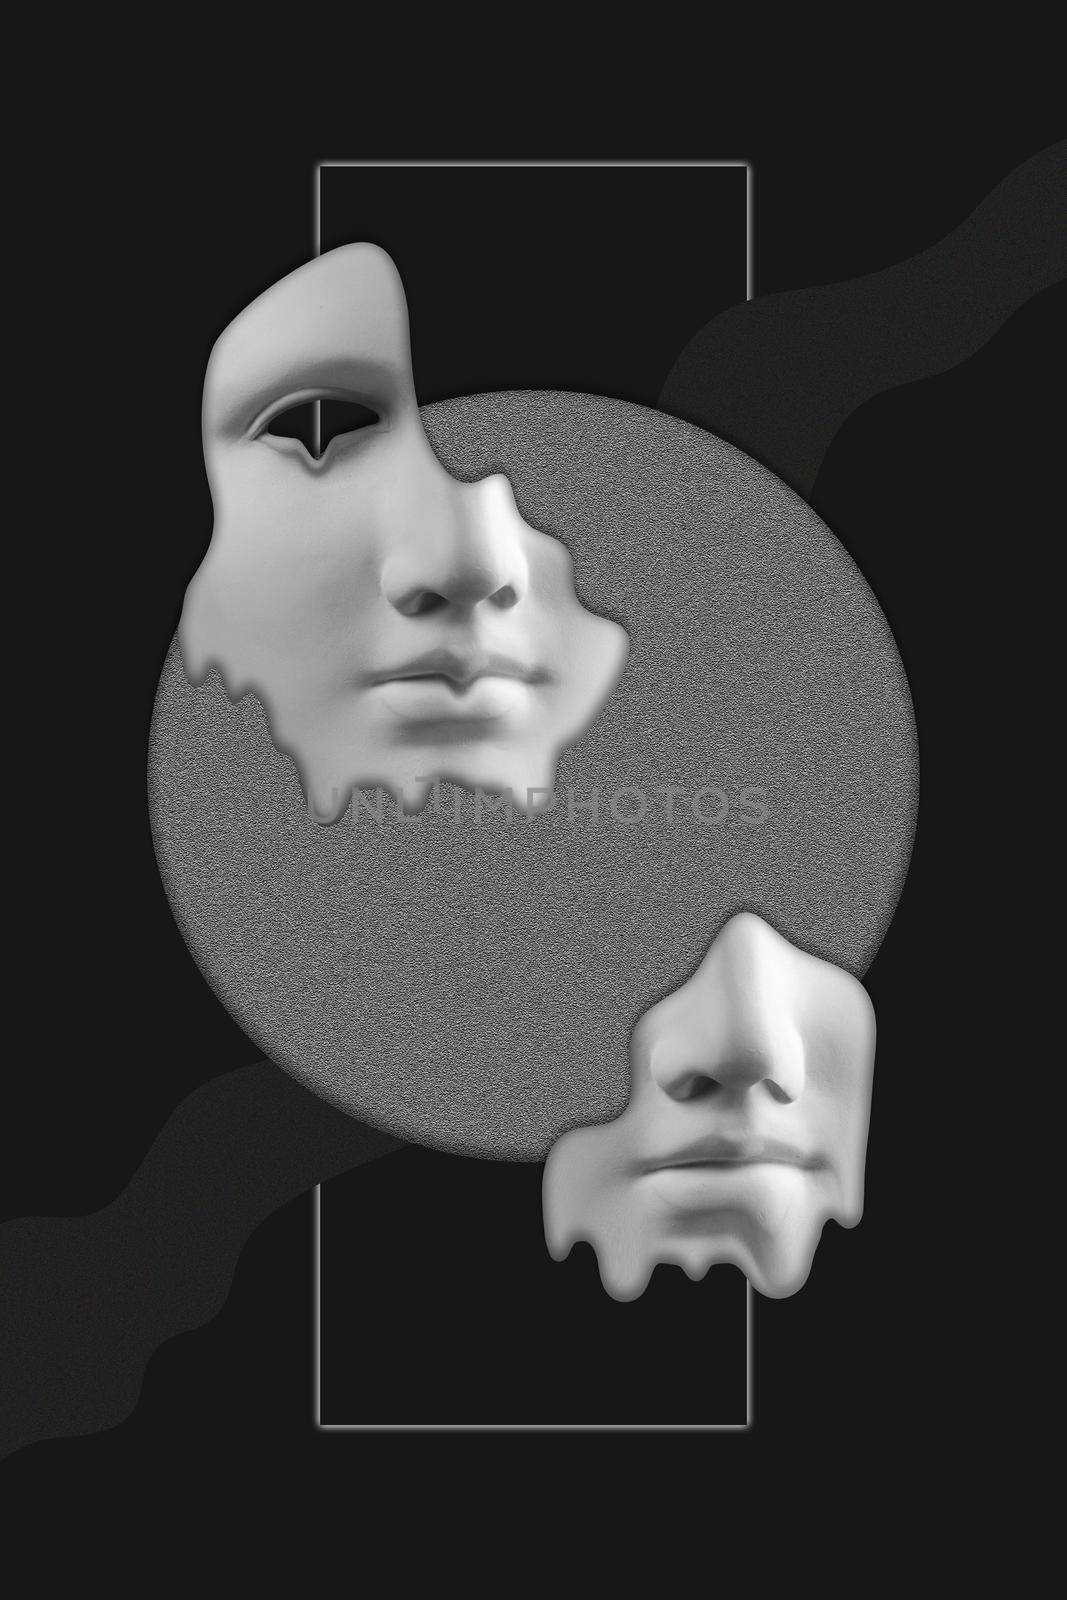 Antique sculpture of woman face surreal collage in pop art style. Modern image with cut details of statue head on a black. Dark concept. Contemporary art poster. Funky retro minimalism. Zine culture. by bashta